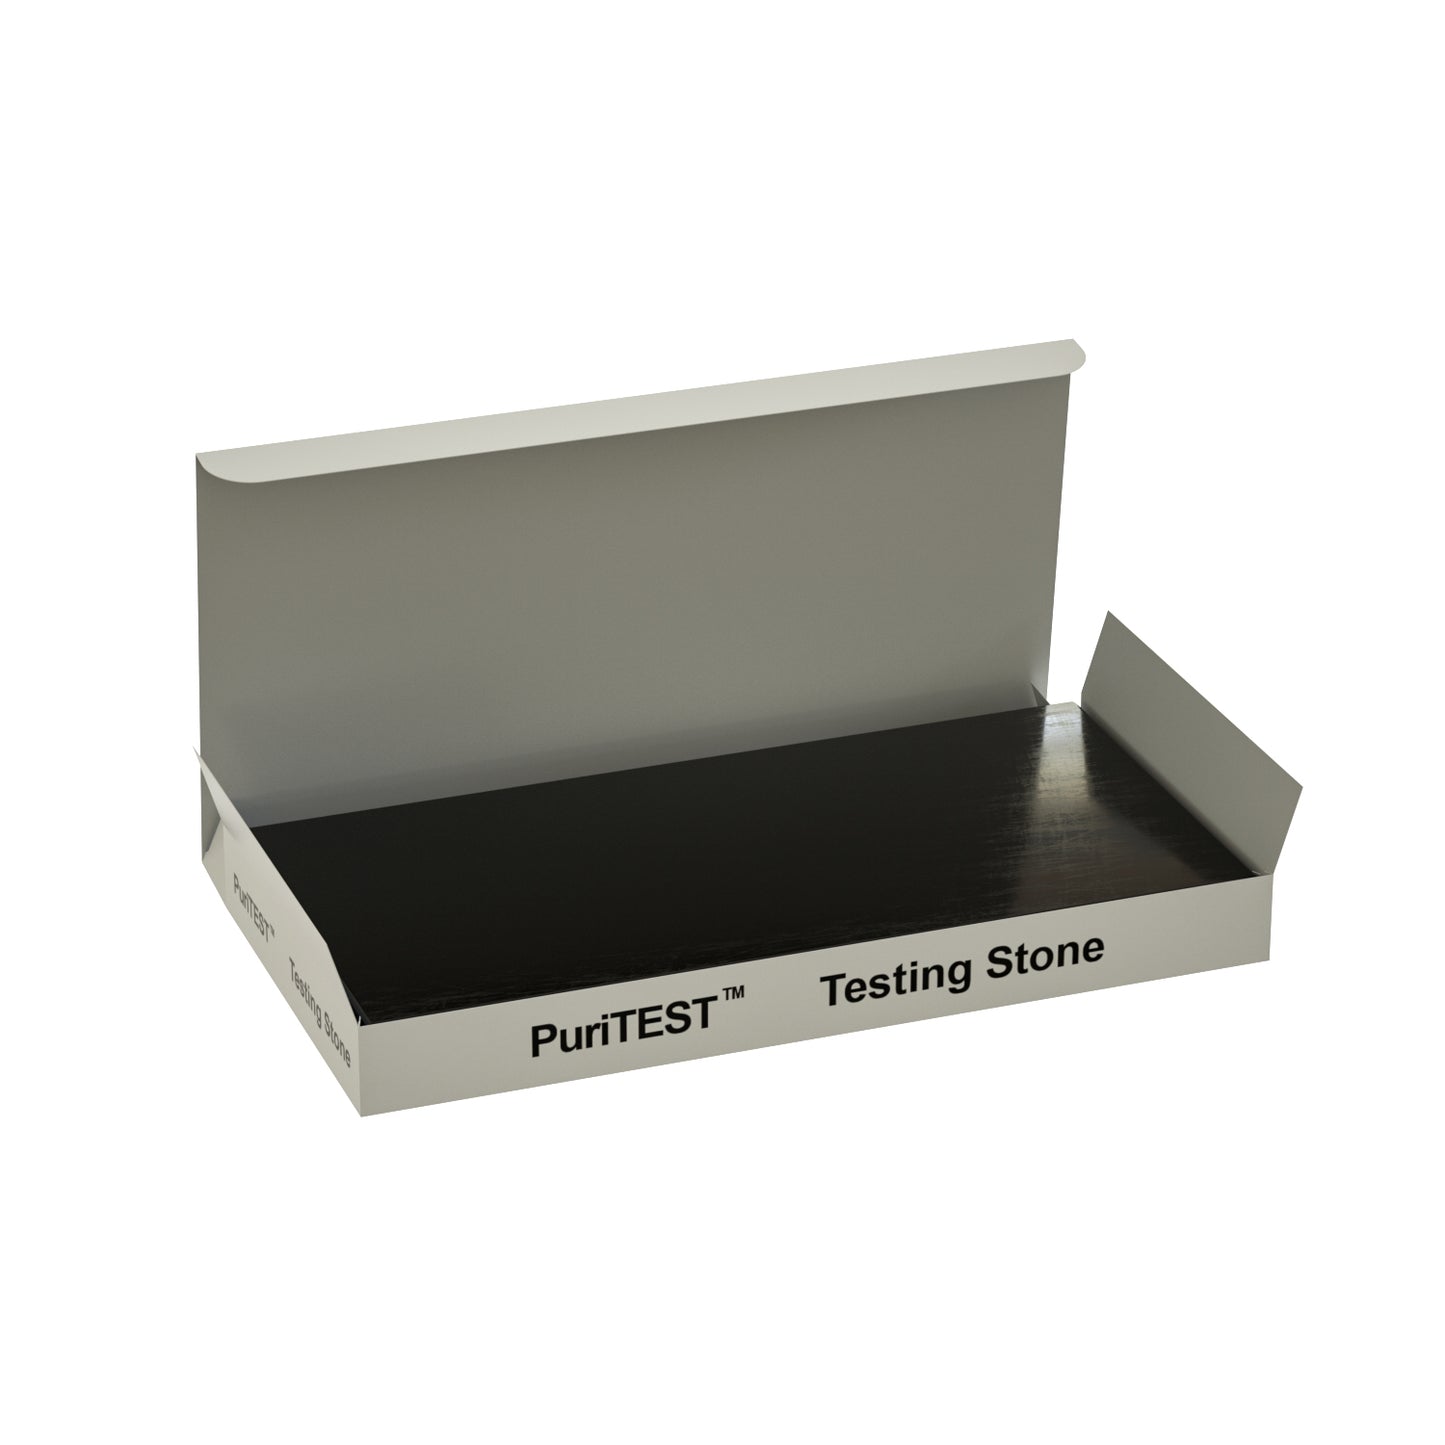 Large PuriTEST Testing Stone 2" x 4" Gold Testing Solutions Kit Silver Platinum Scratch